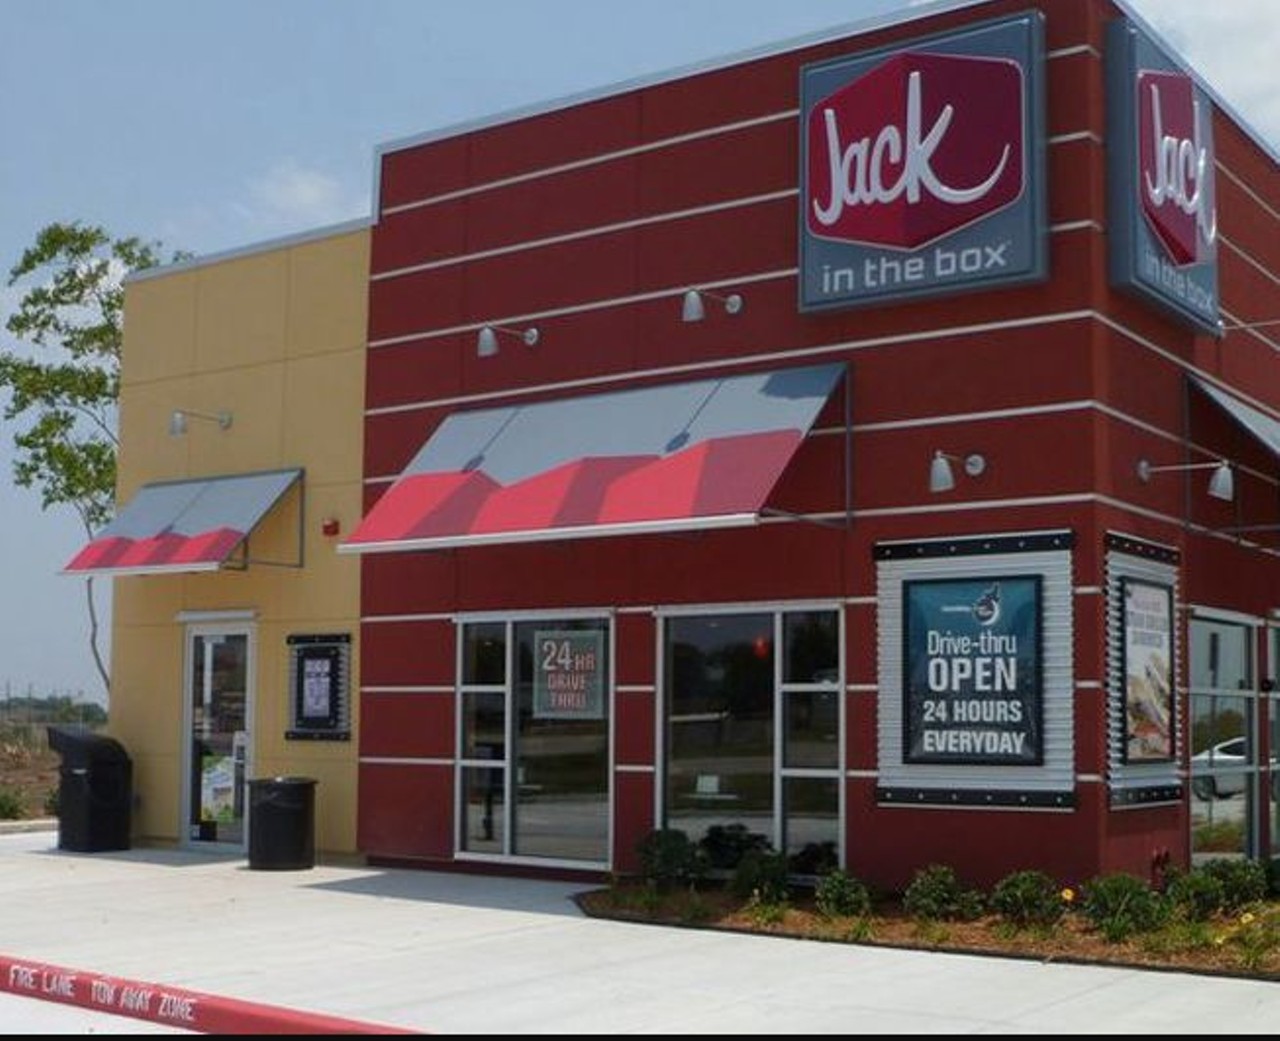 Jack in the Box
This California-based chain has sweet and gooey ribeye sandwiches, burgers piled high with curly fries, and even purple Coca-Colas. They've got franchises around the country, but we're yet to see Jack anywhere in Michigan. 
Photo via Jackinthebox.com